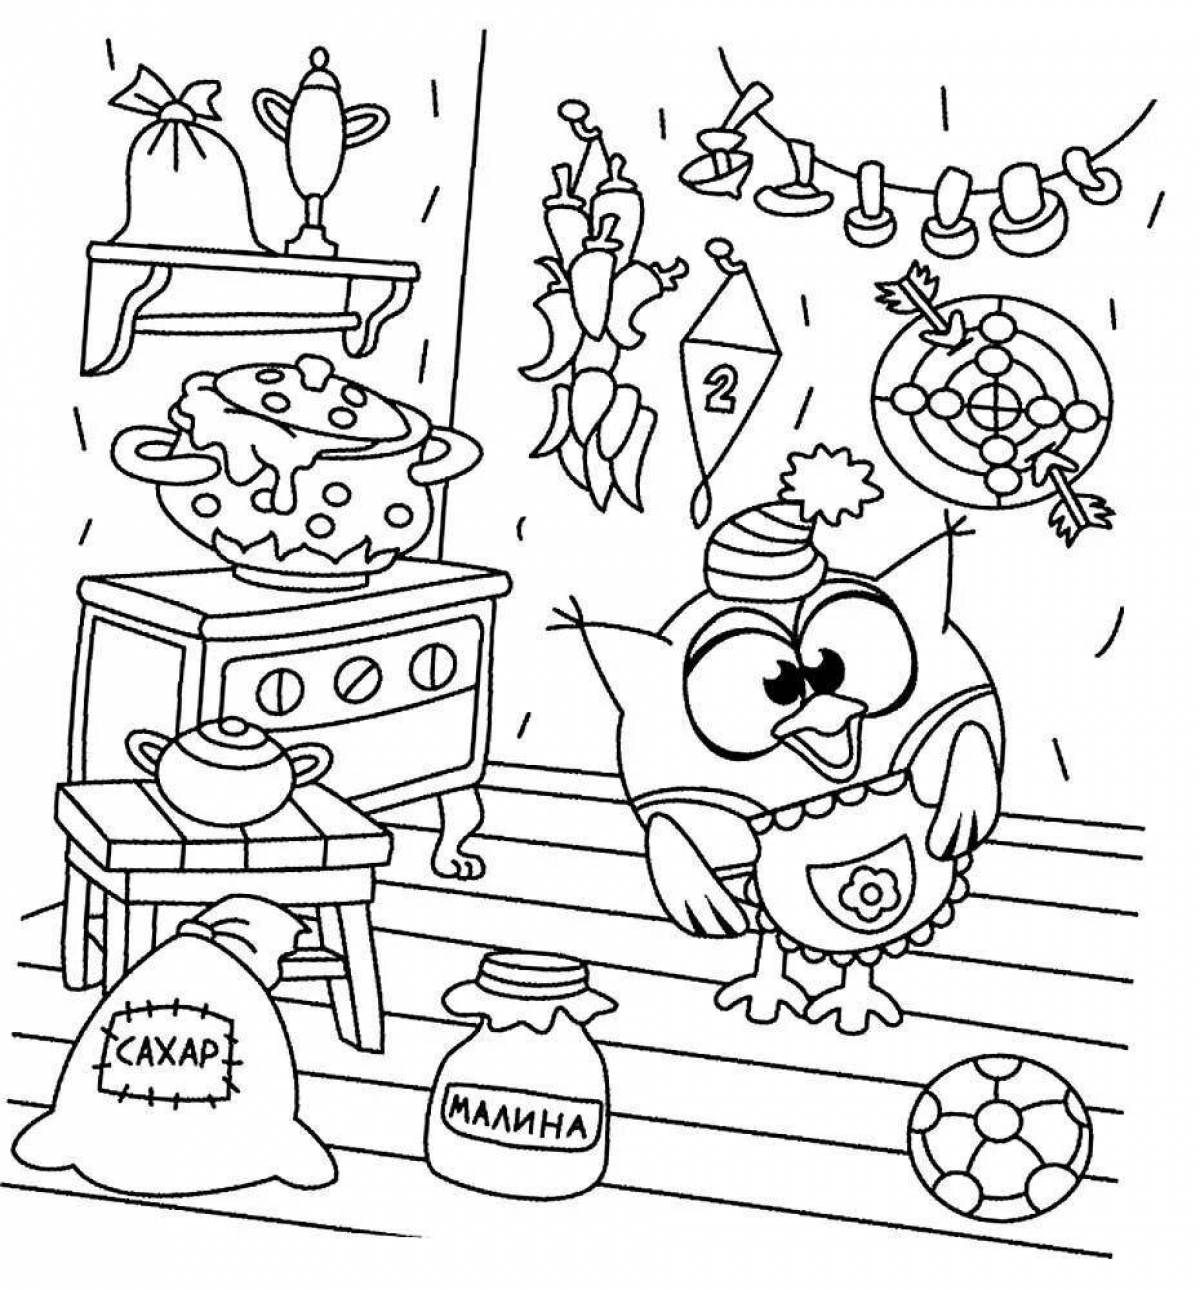 Exquisite smeshariki coloring pages